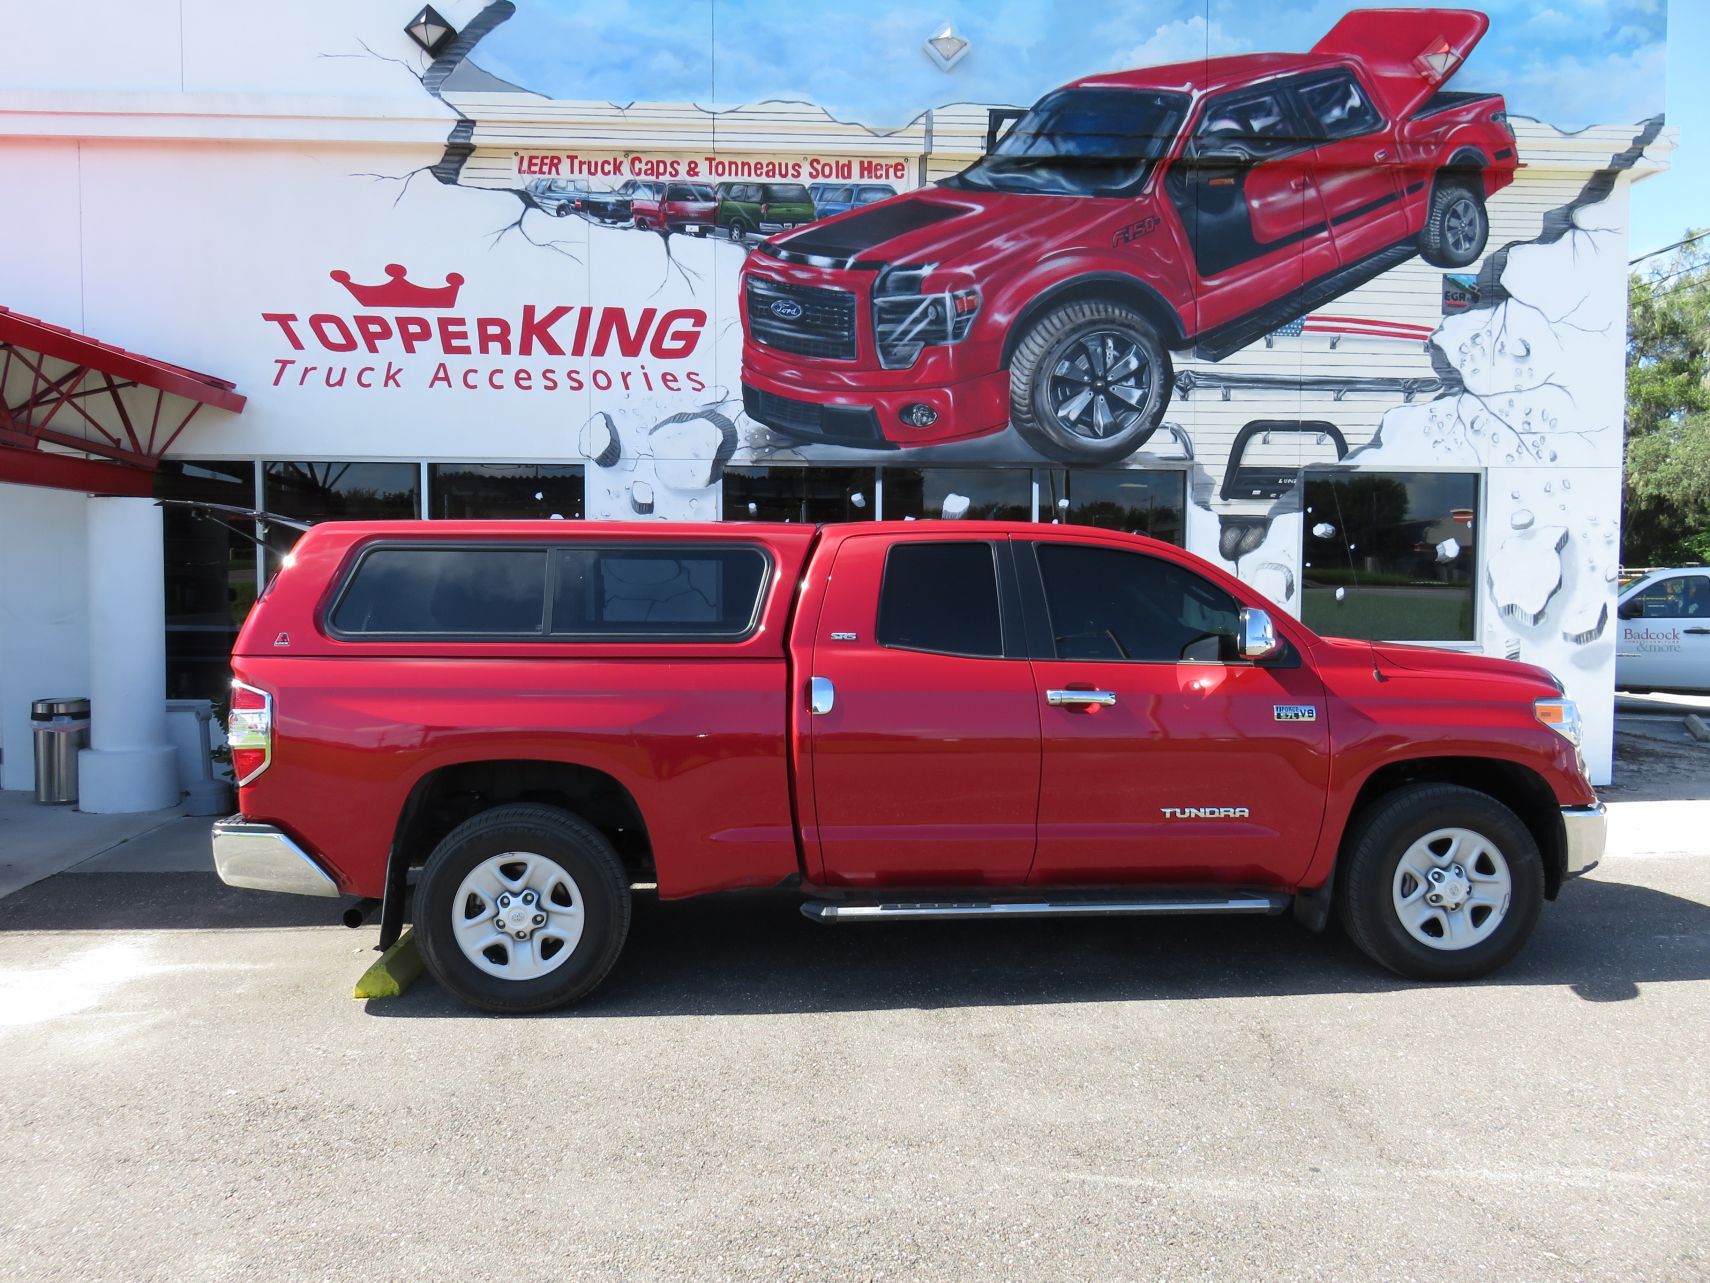 Toyota Tundra Leer 100xr With Nerf Bars Topperking Topperking Providing All Of Tampa Bay With Quality Truck Accessories